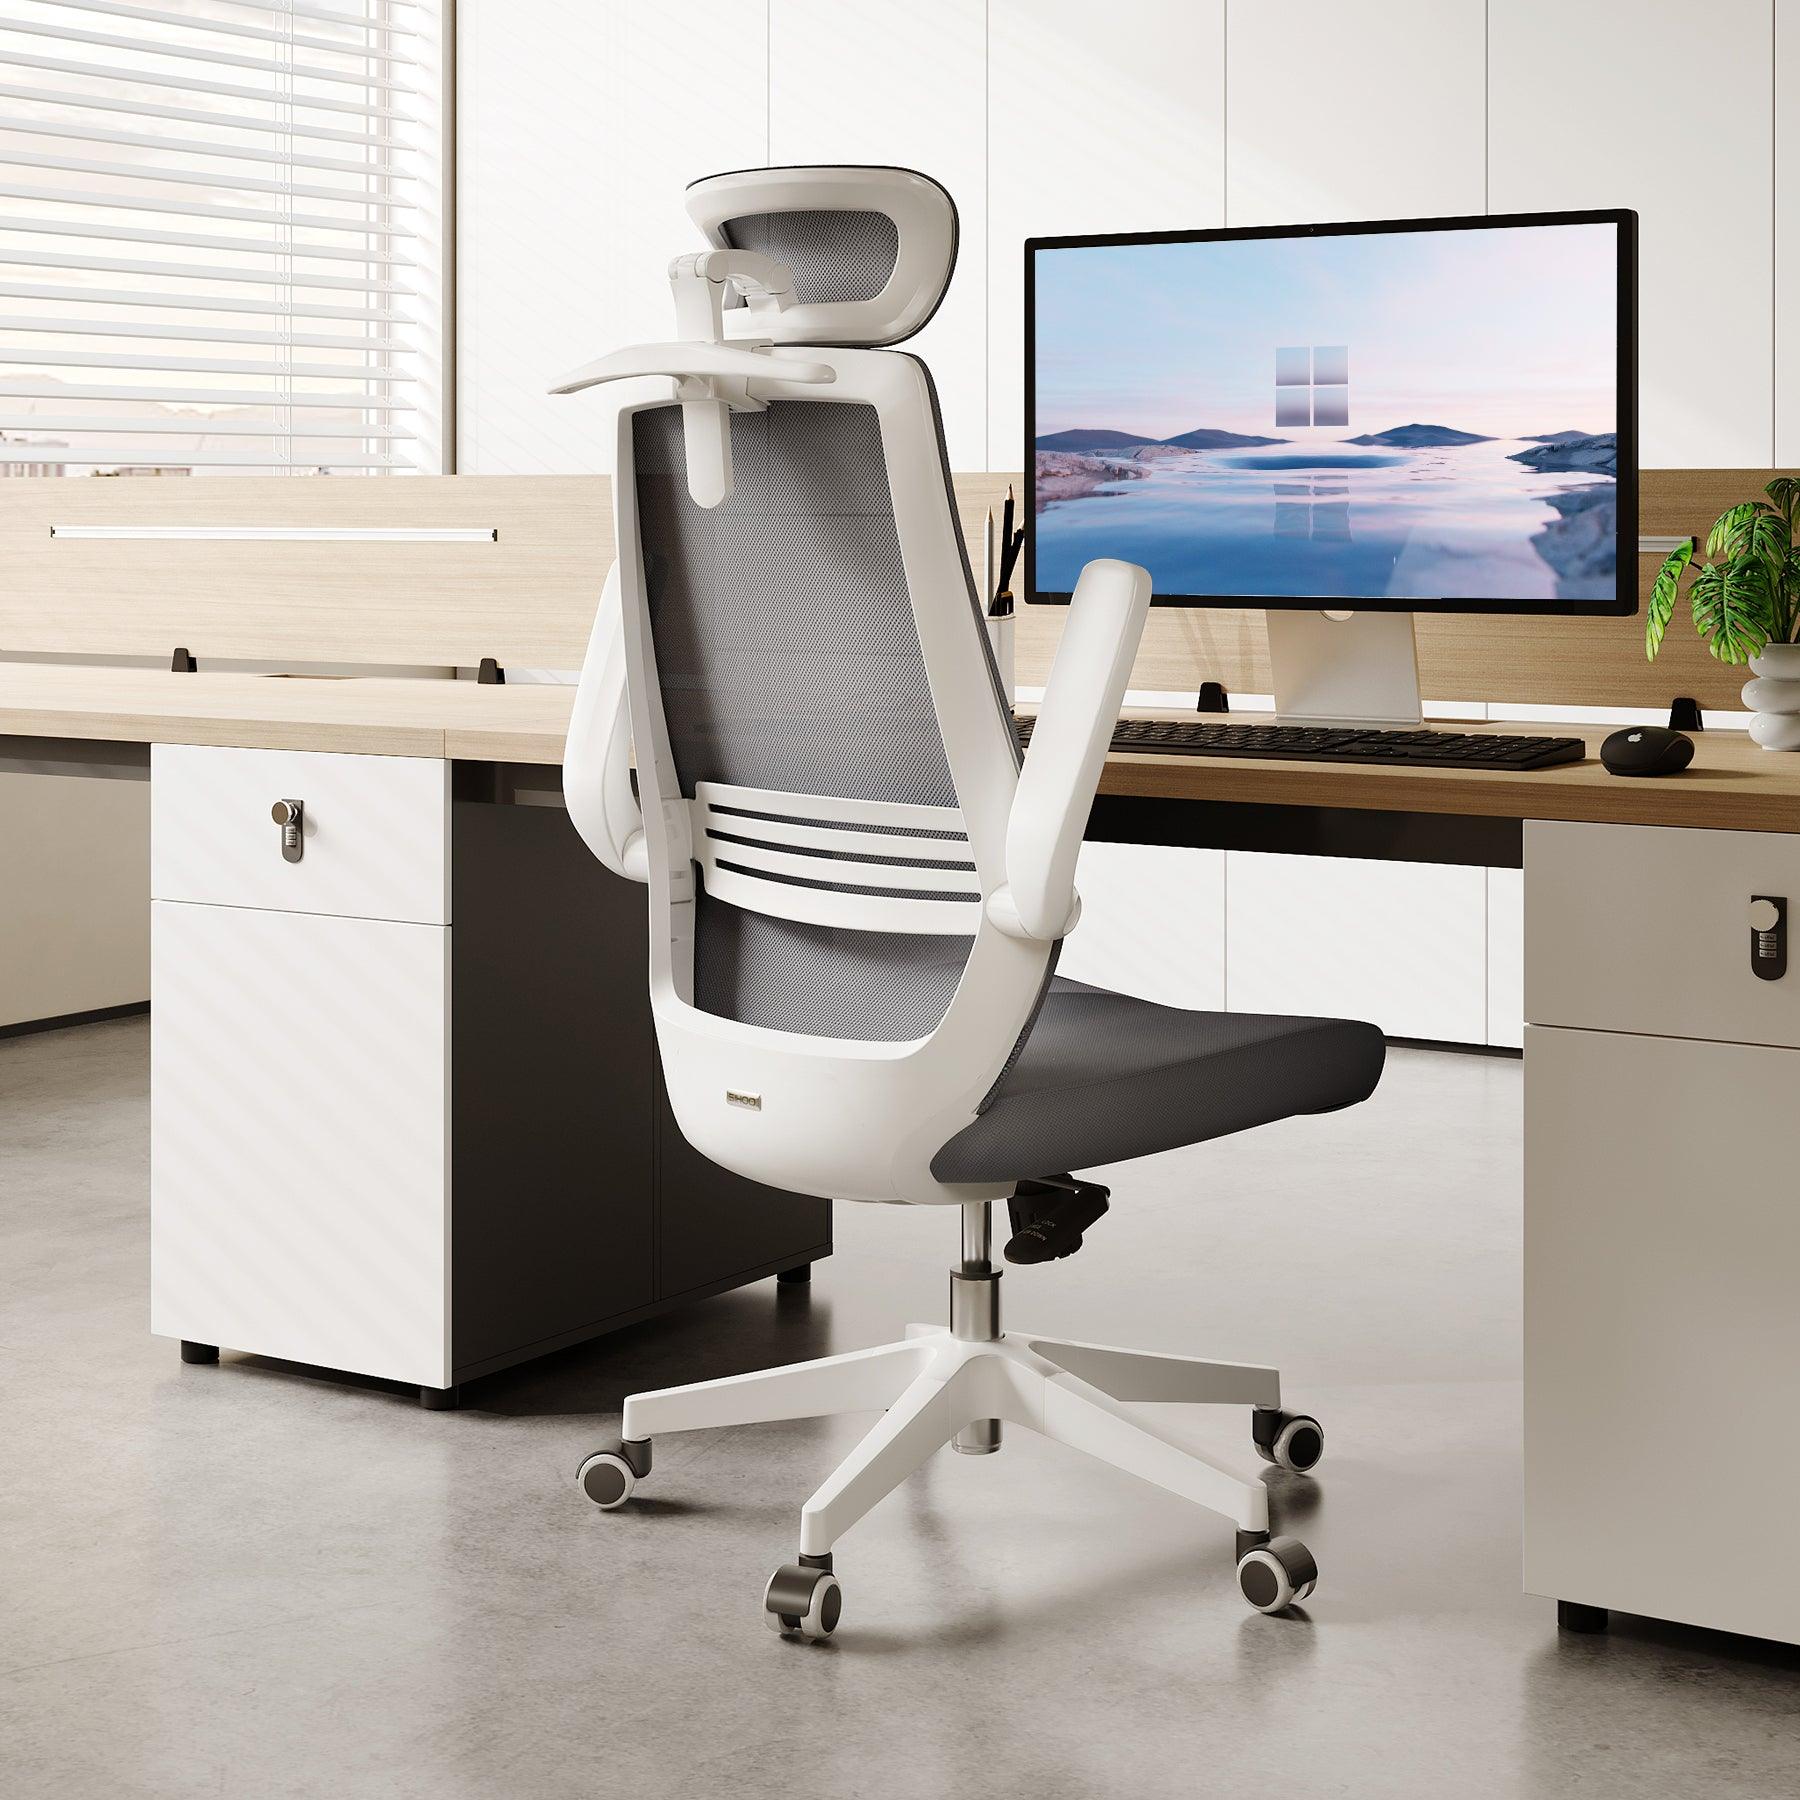 Sihoo M76A Ergonomic Office Chair with Headrest - Official US Sihoo Store